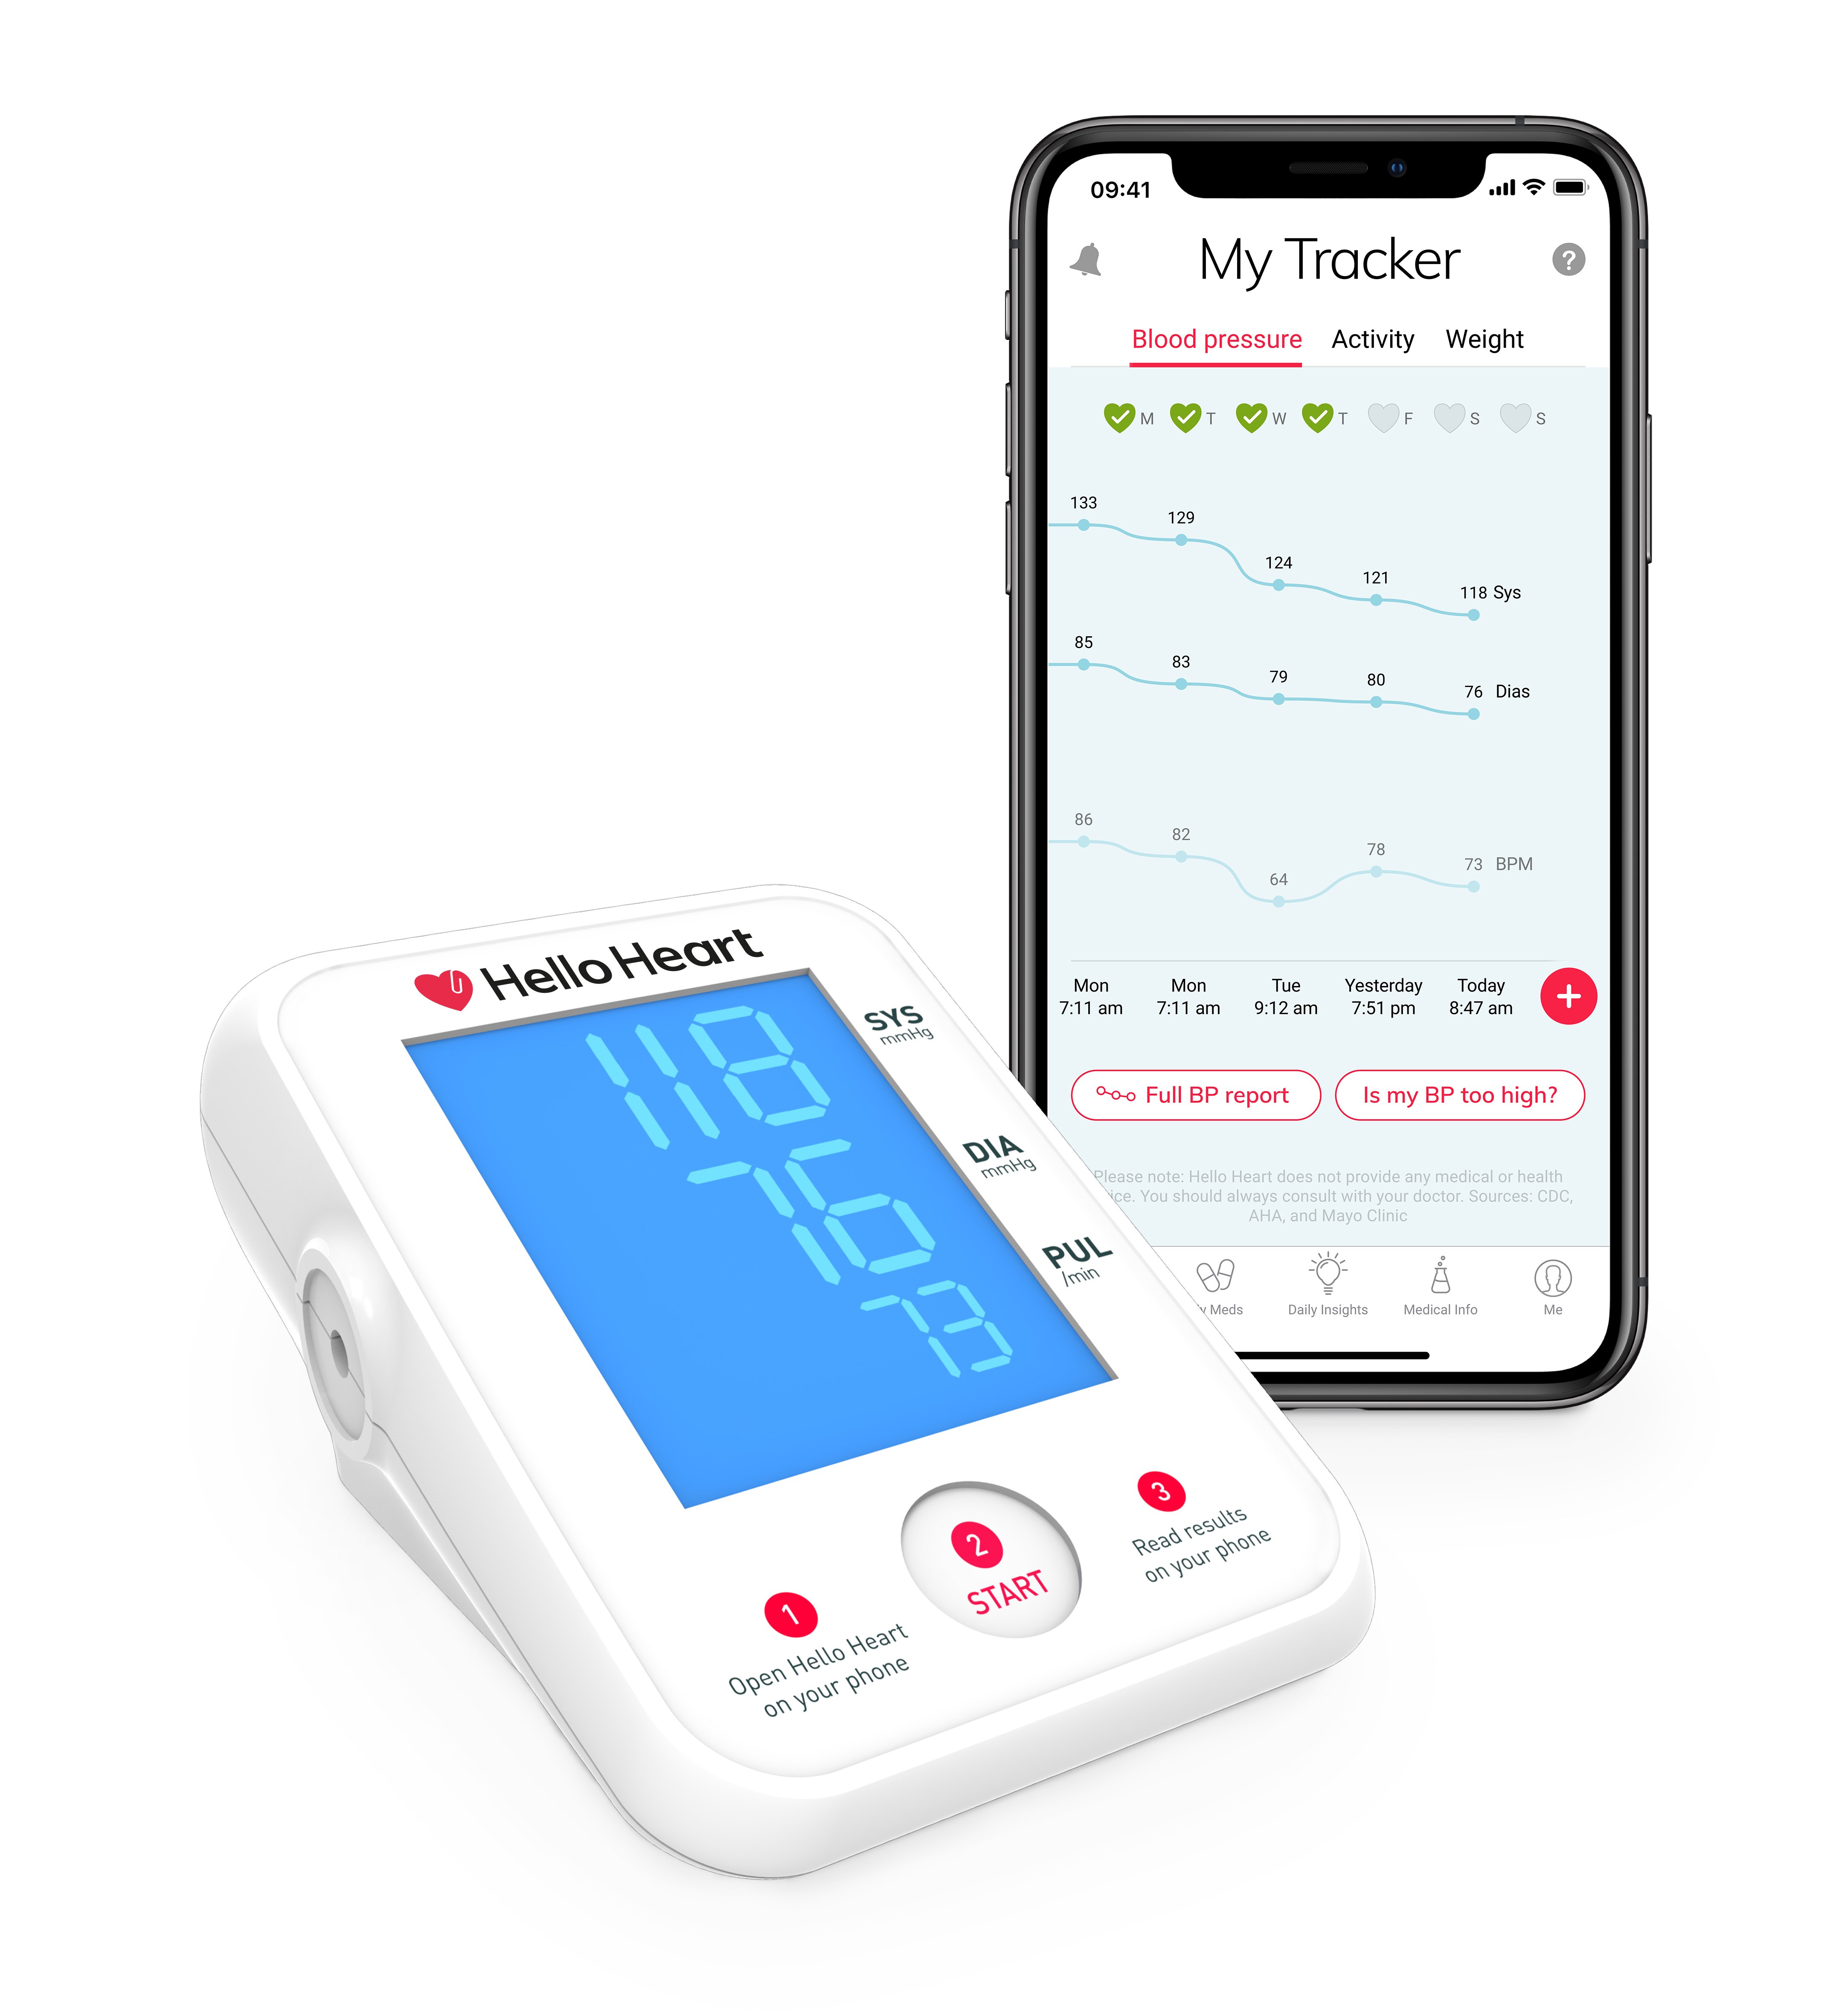 blood pressure monitor and smartphone with screenshot of Hello Heart app